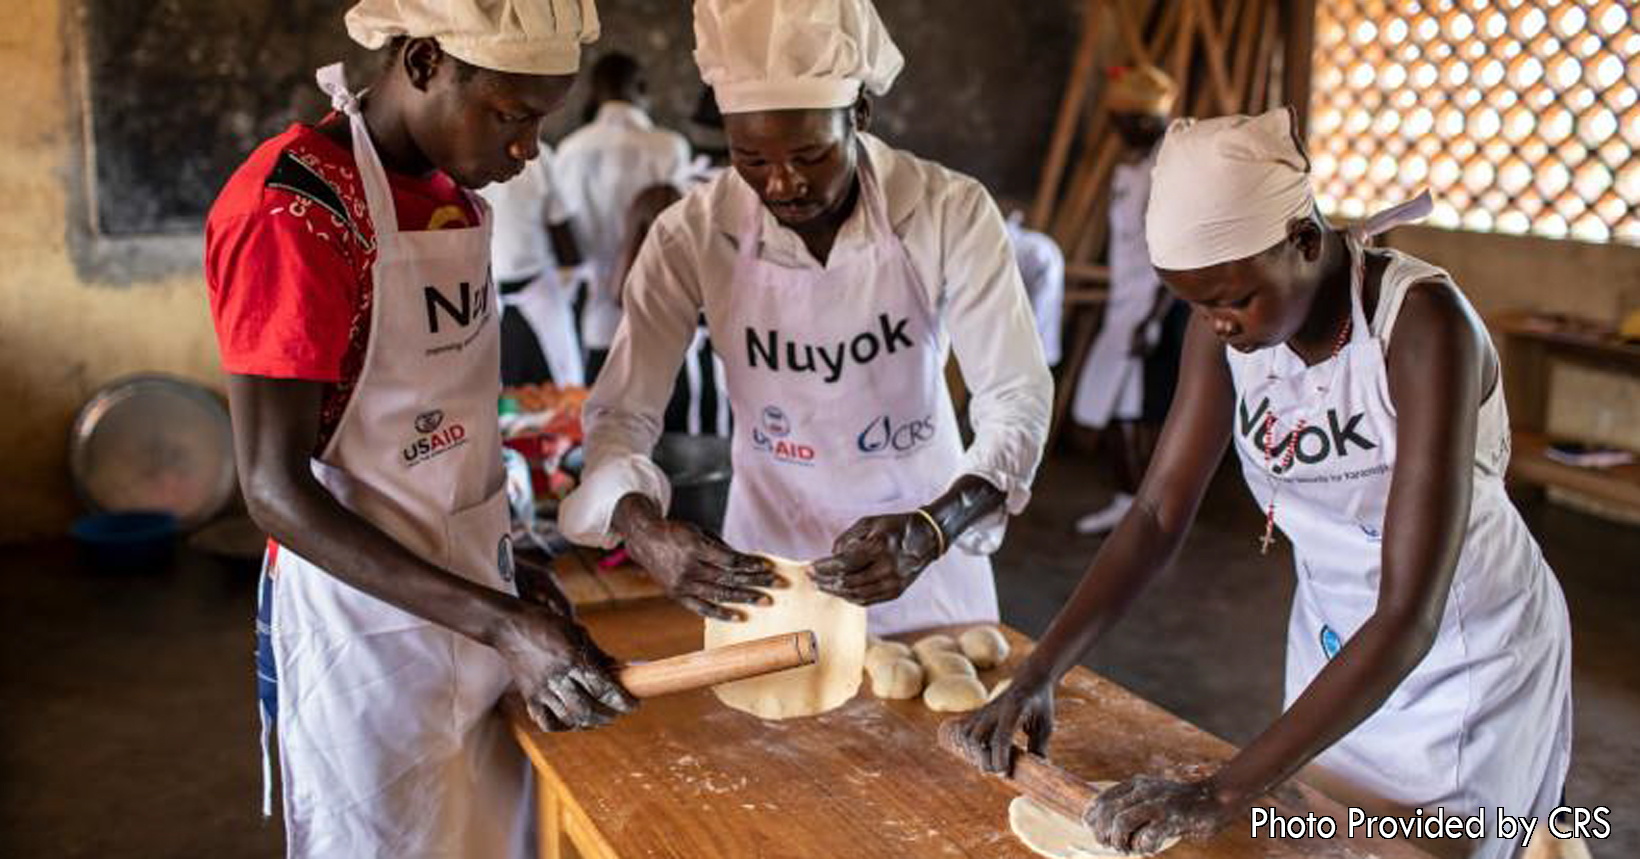 Will Baxter from the Catholic Relief Services captures a moment of young adults involved in the program. The young adults are using the skills and training that they received to roll out dough to make some chapatis. Chapatis is an unleavened bread made from wheat flour and water. The baking class is part of a vocational training initiative.